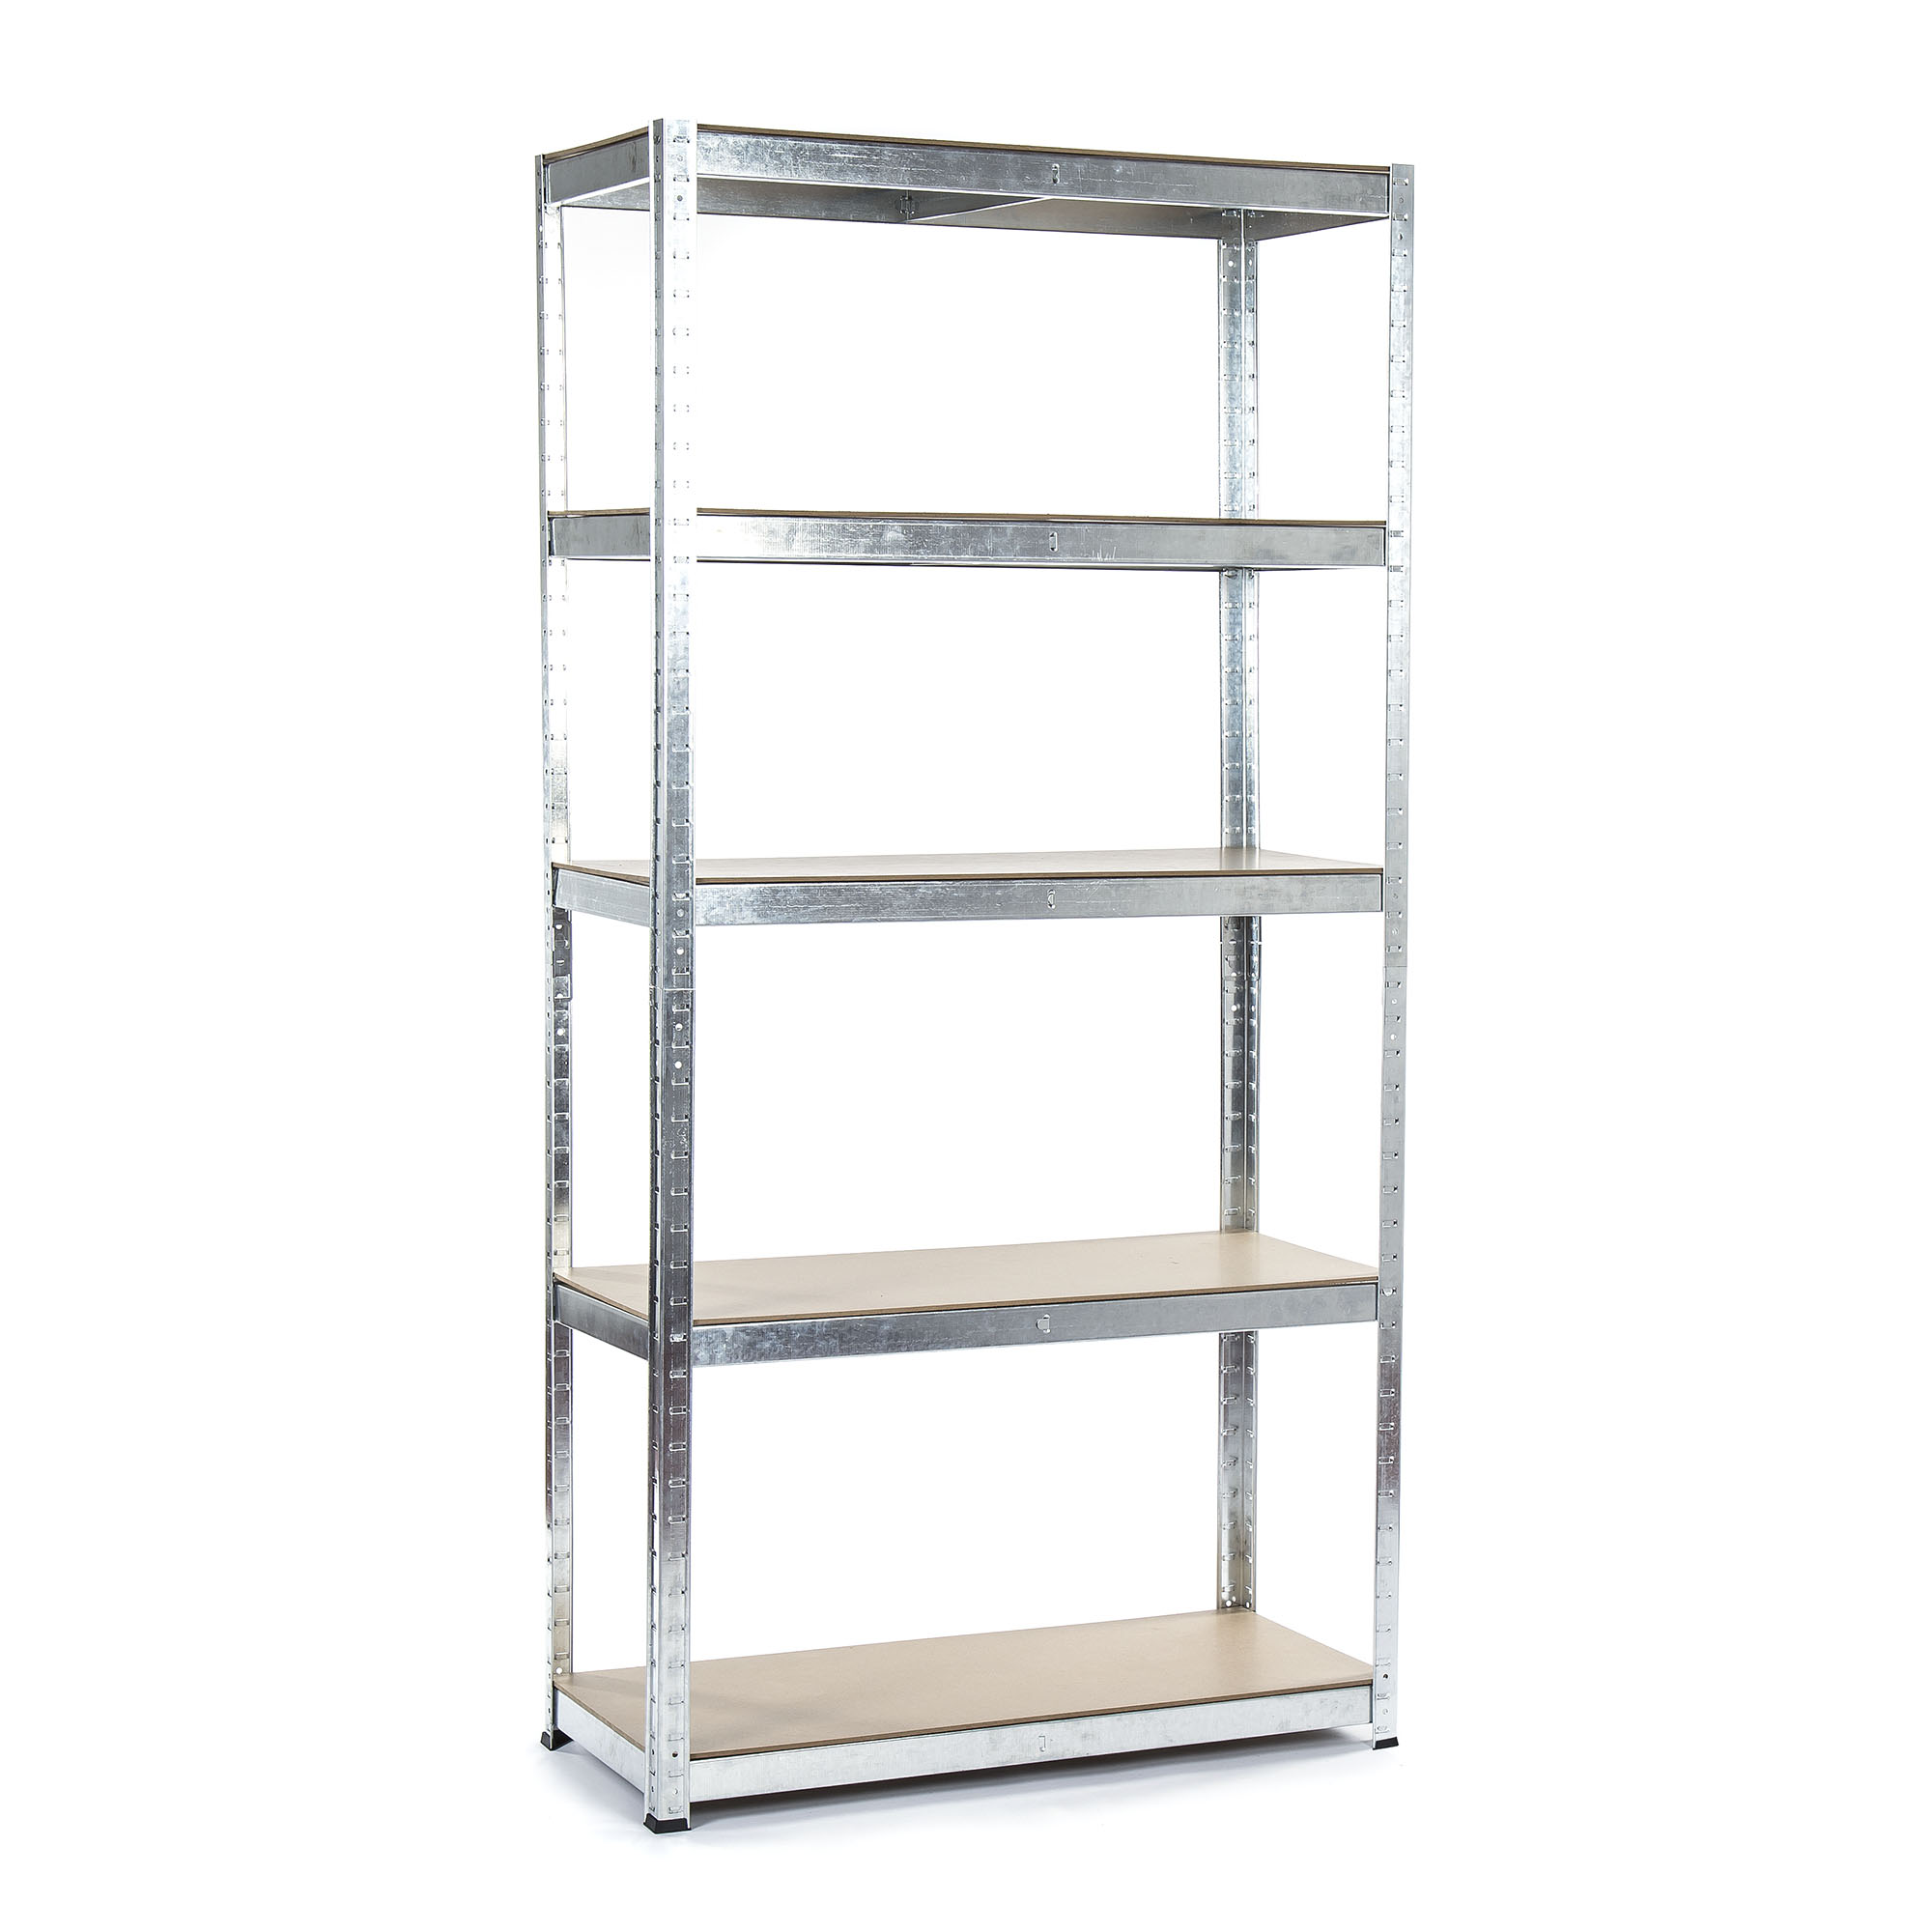 Easy to assemble Galvanised Shelving - Assembly Instructions